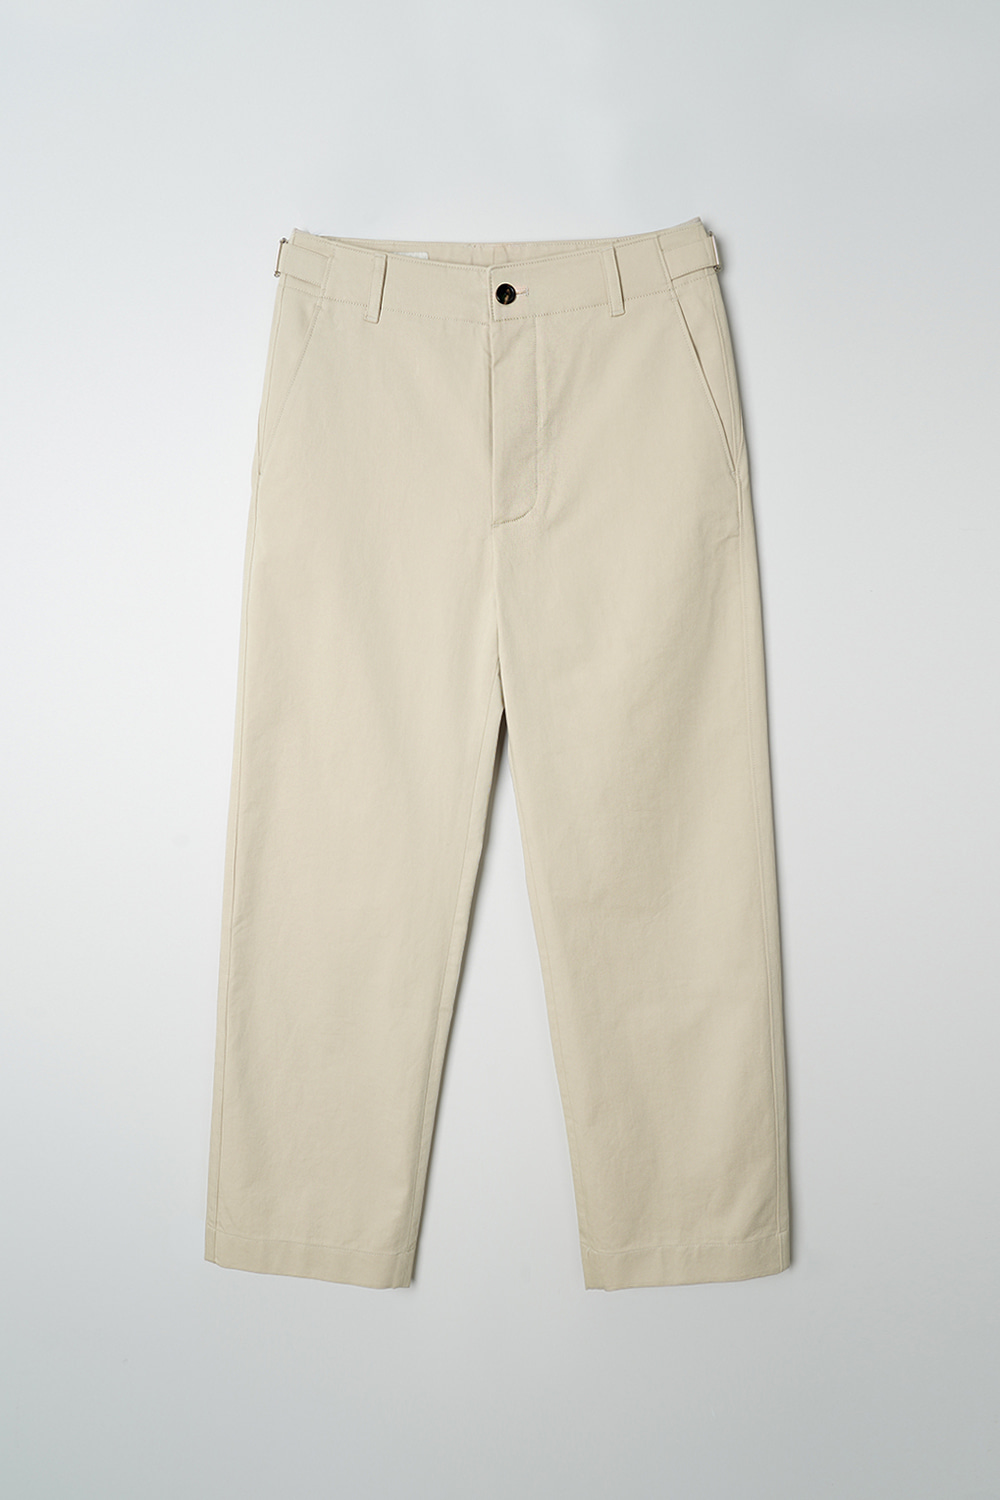 22AW OFFICER CHINO PANTS - LIGHT BEIGE